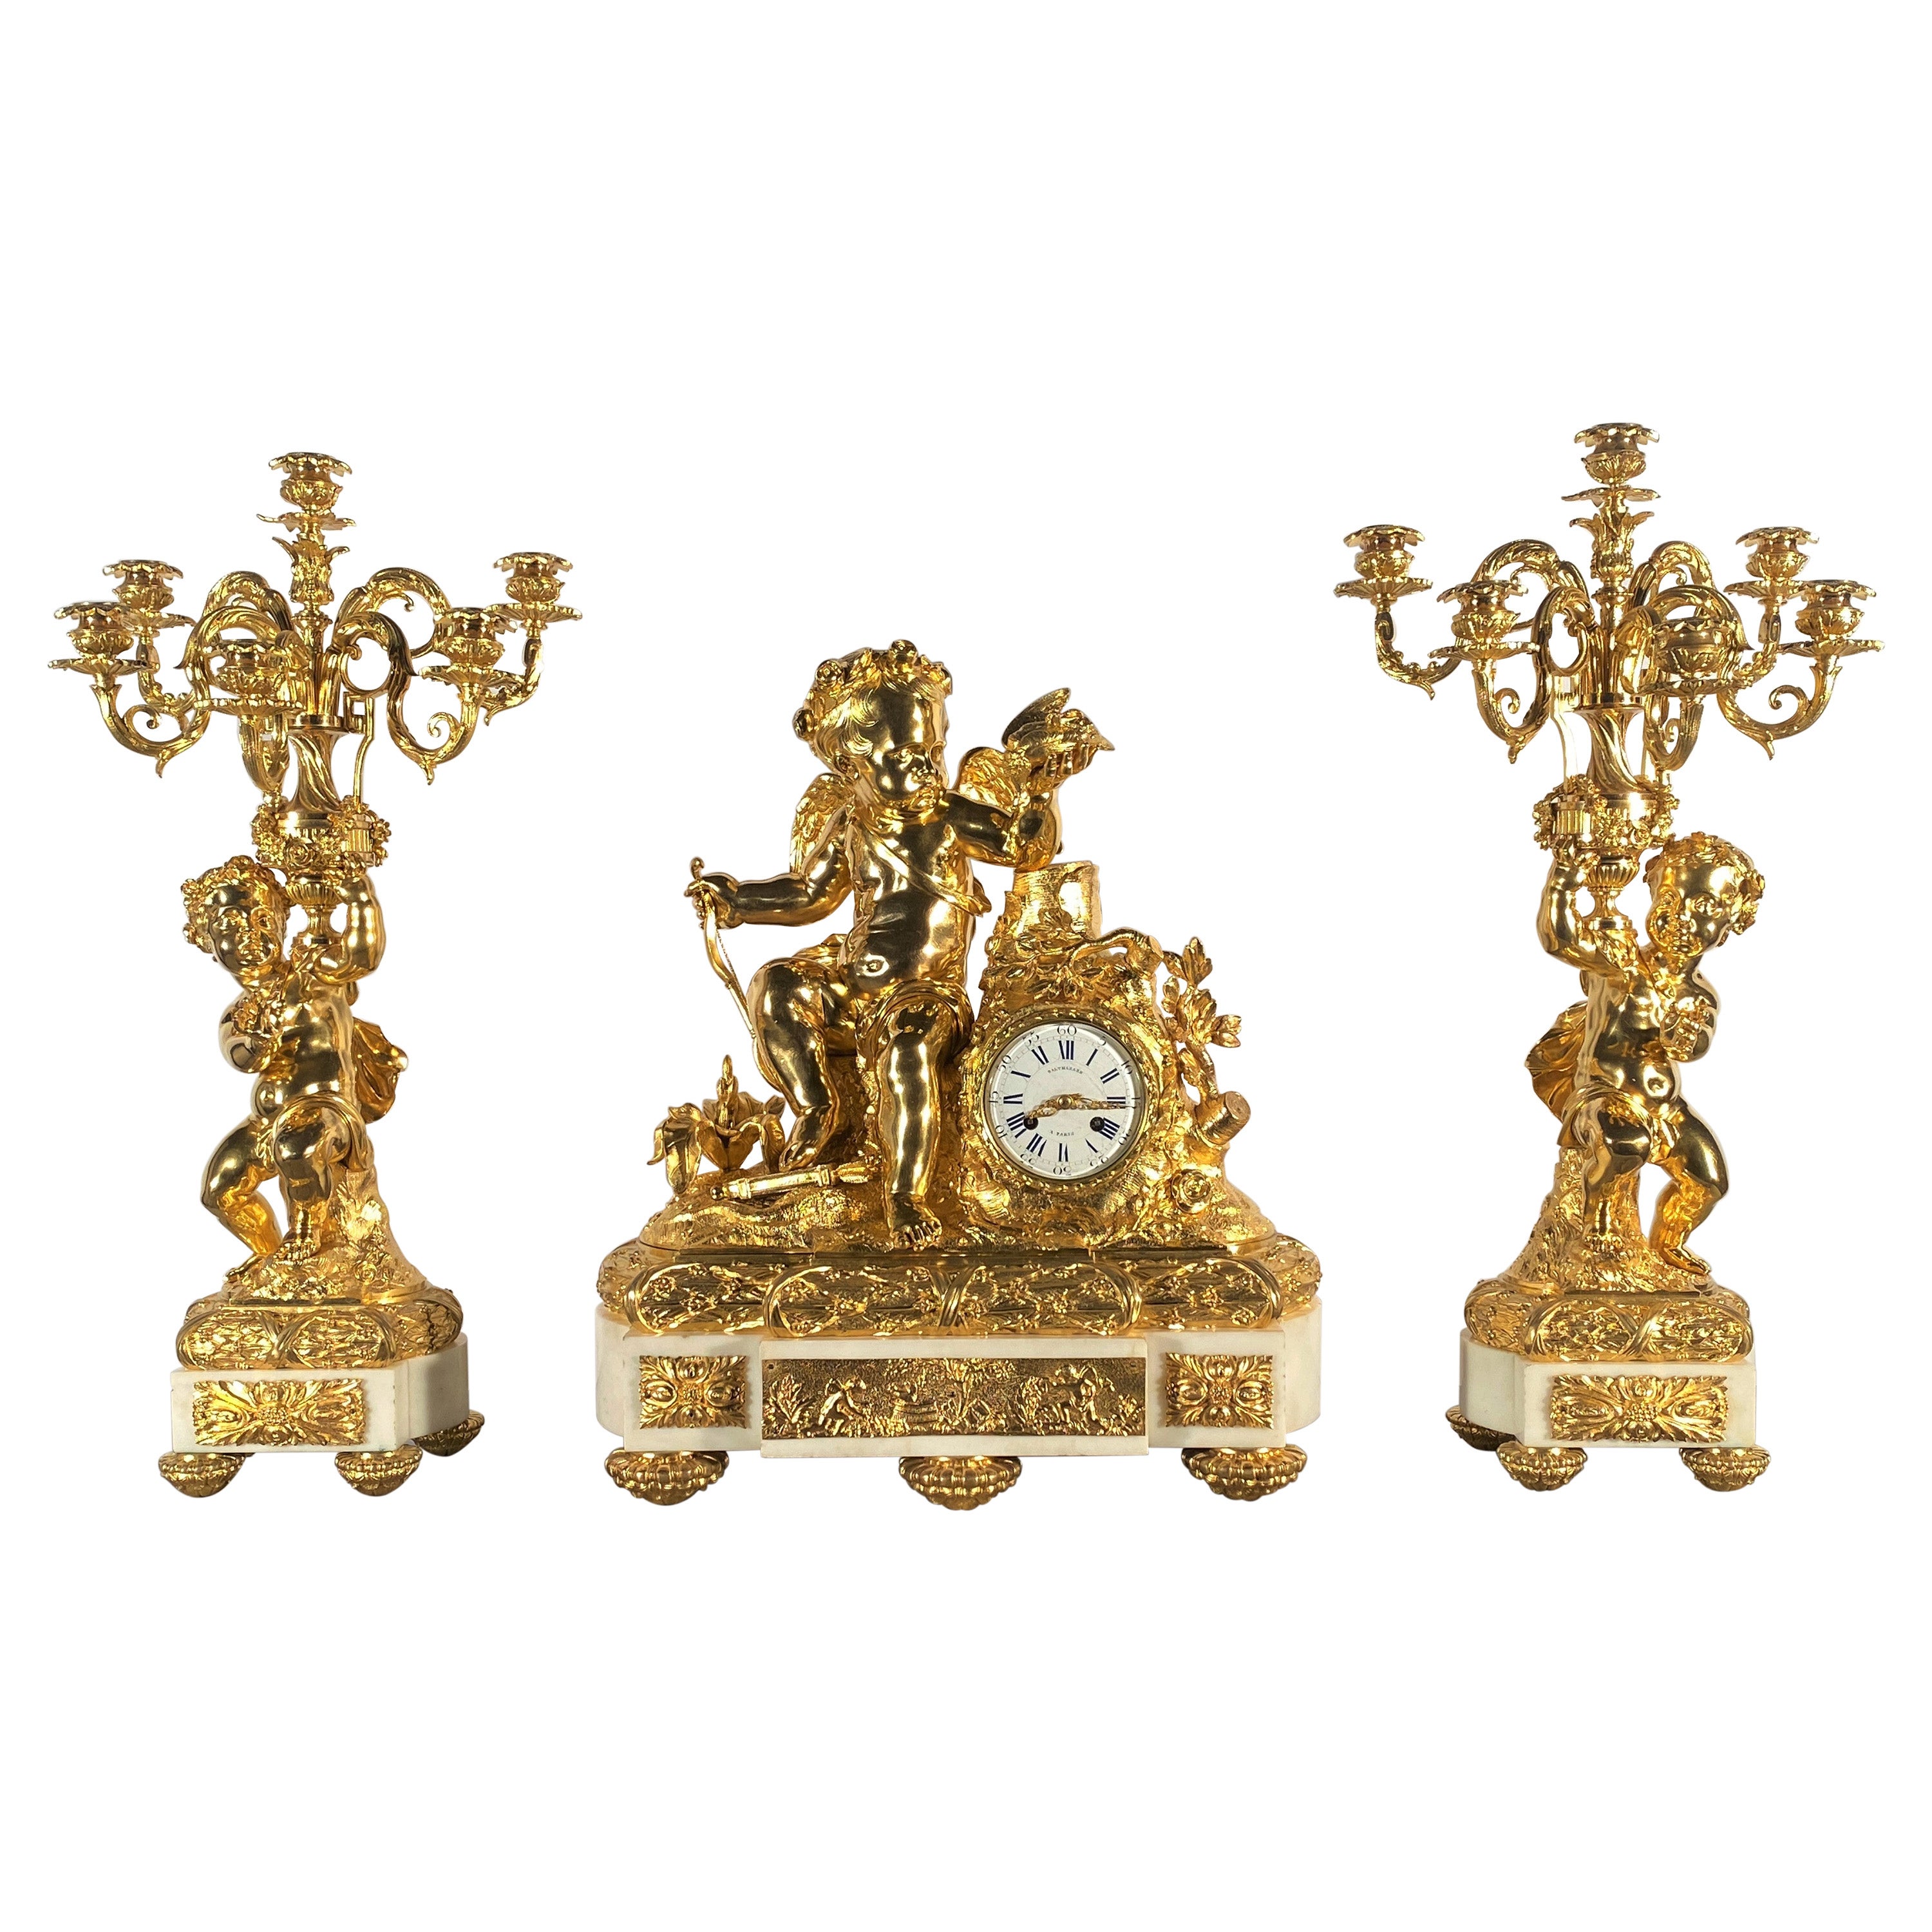 Important Trim in White Marble and Gilt Bronze, 19th Century